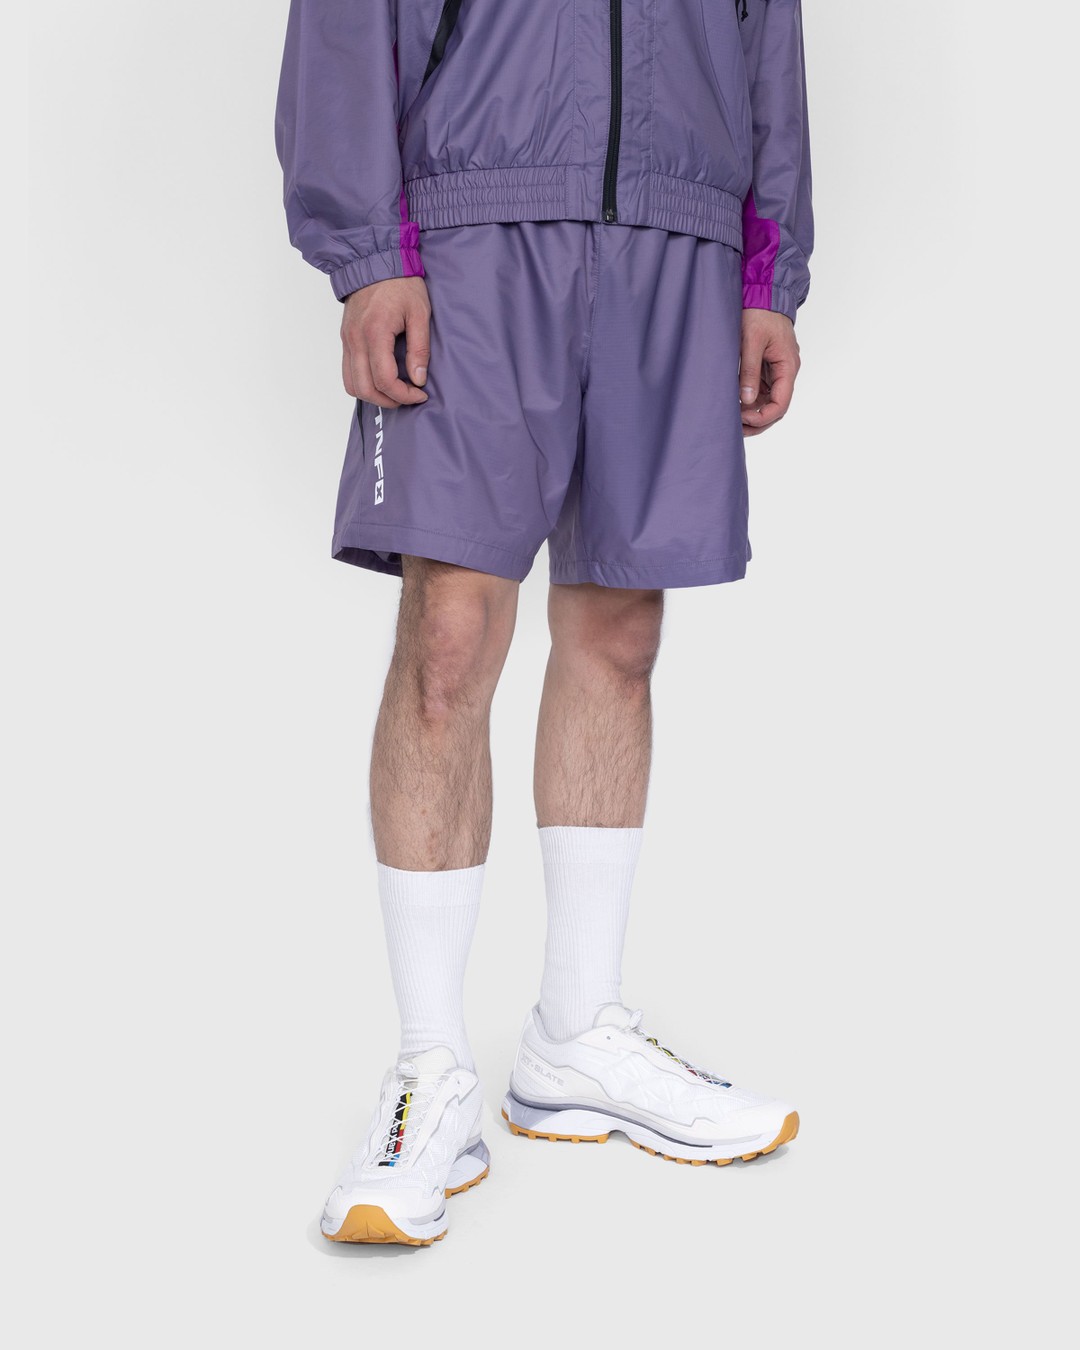 The North Face – TNF X Shorts Purple - Shorts - Blue - Image 2